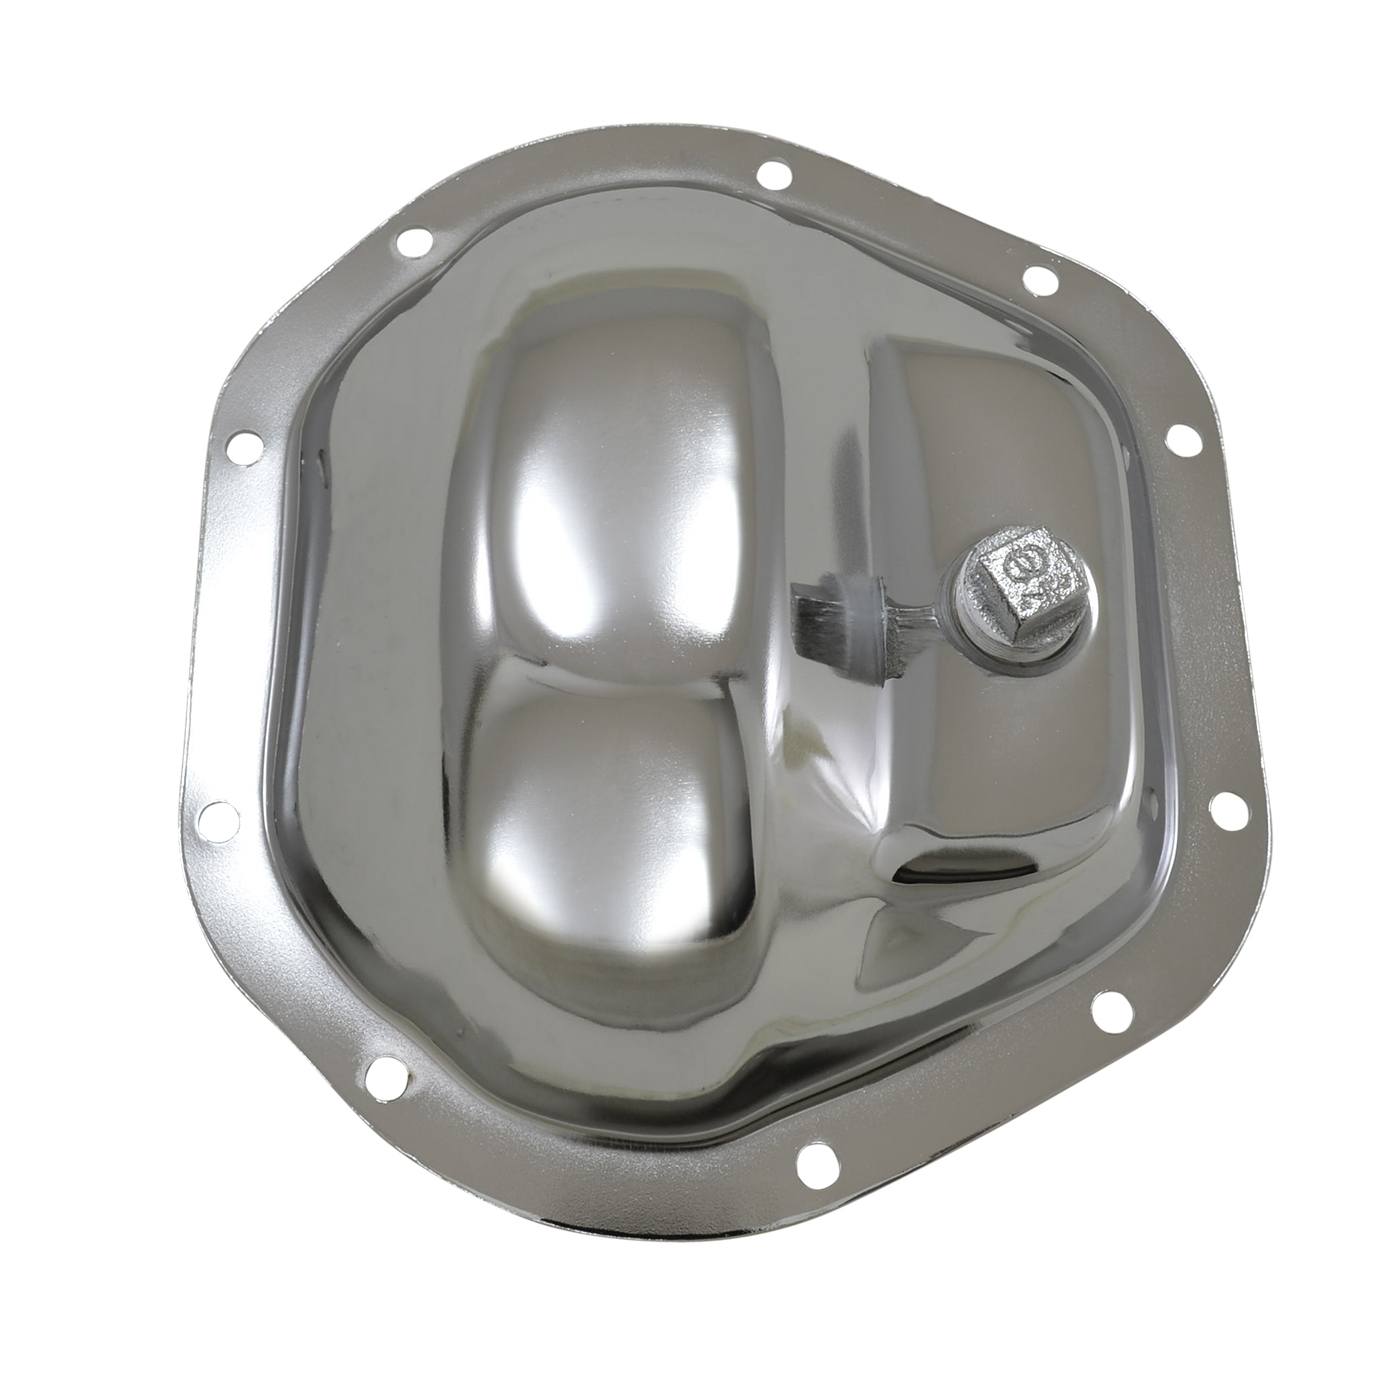 Replacement Chrome Cover for Dana 44 